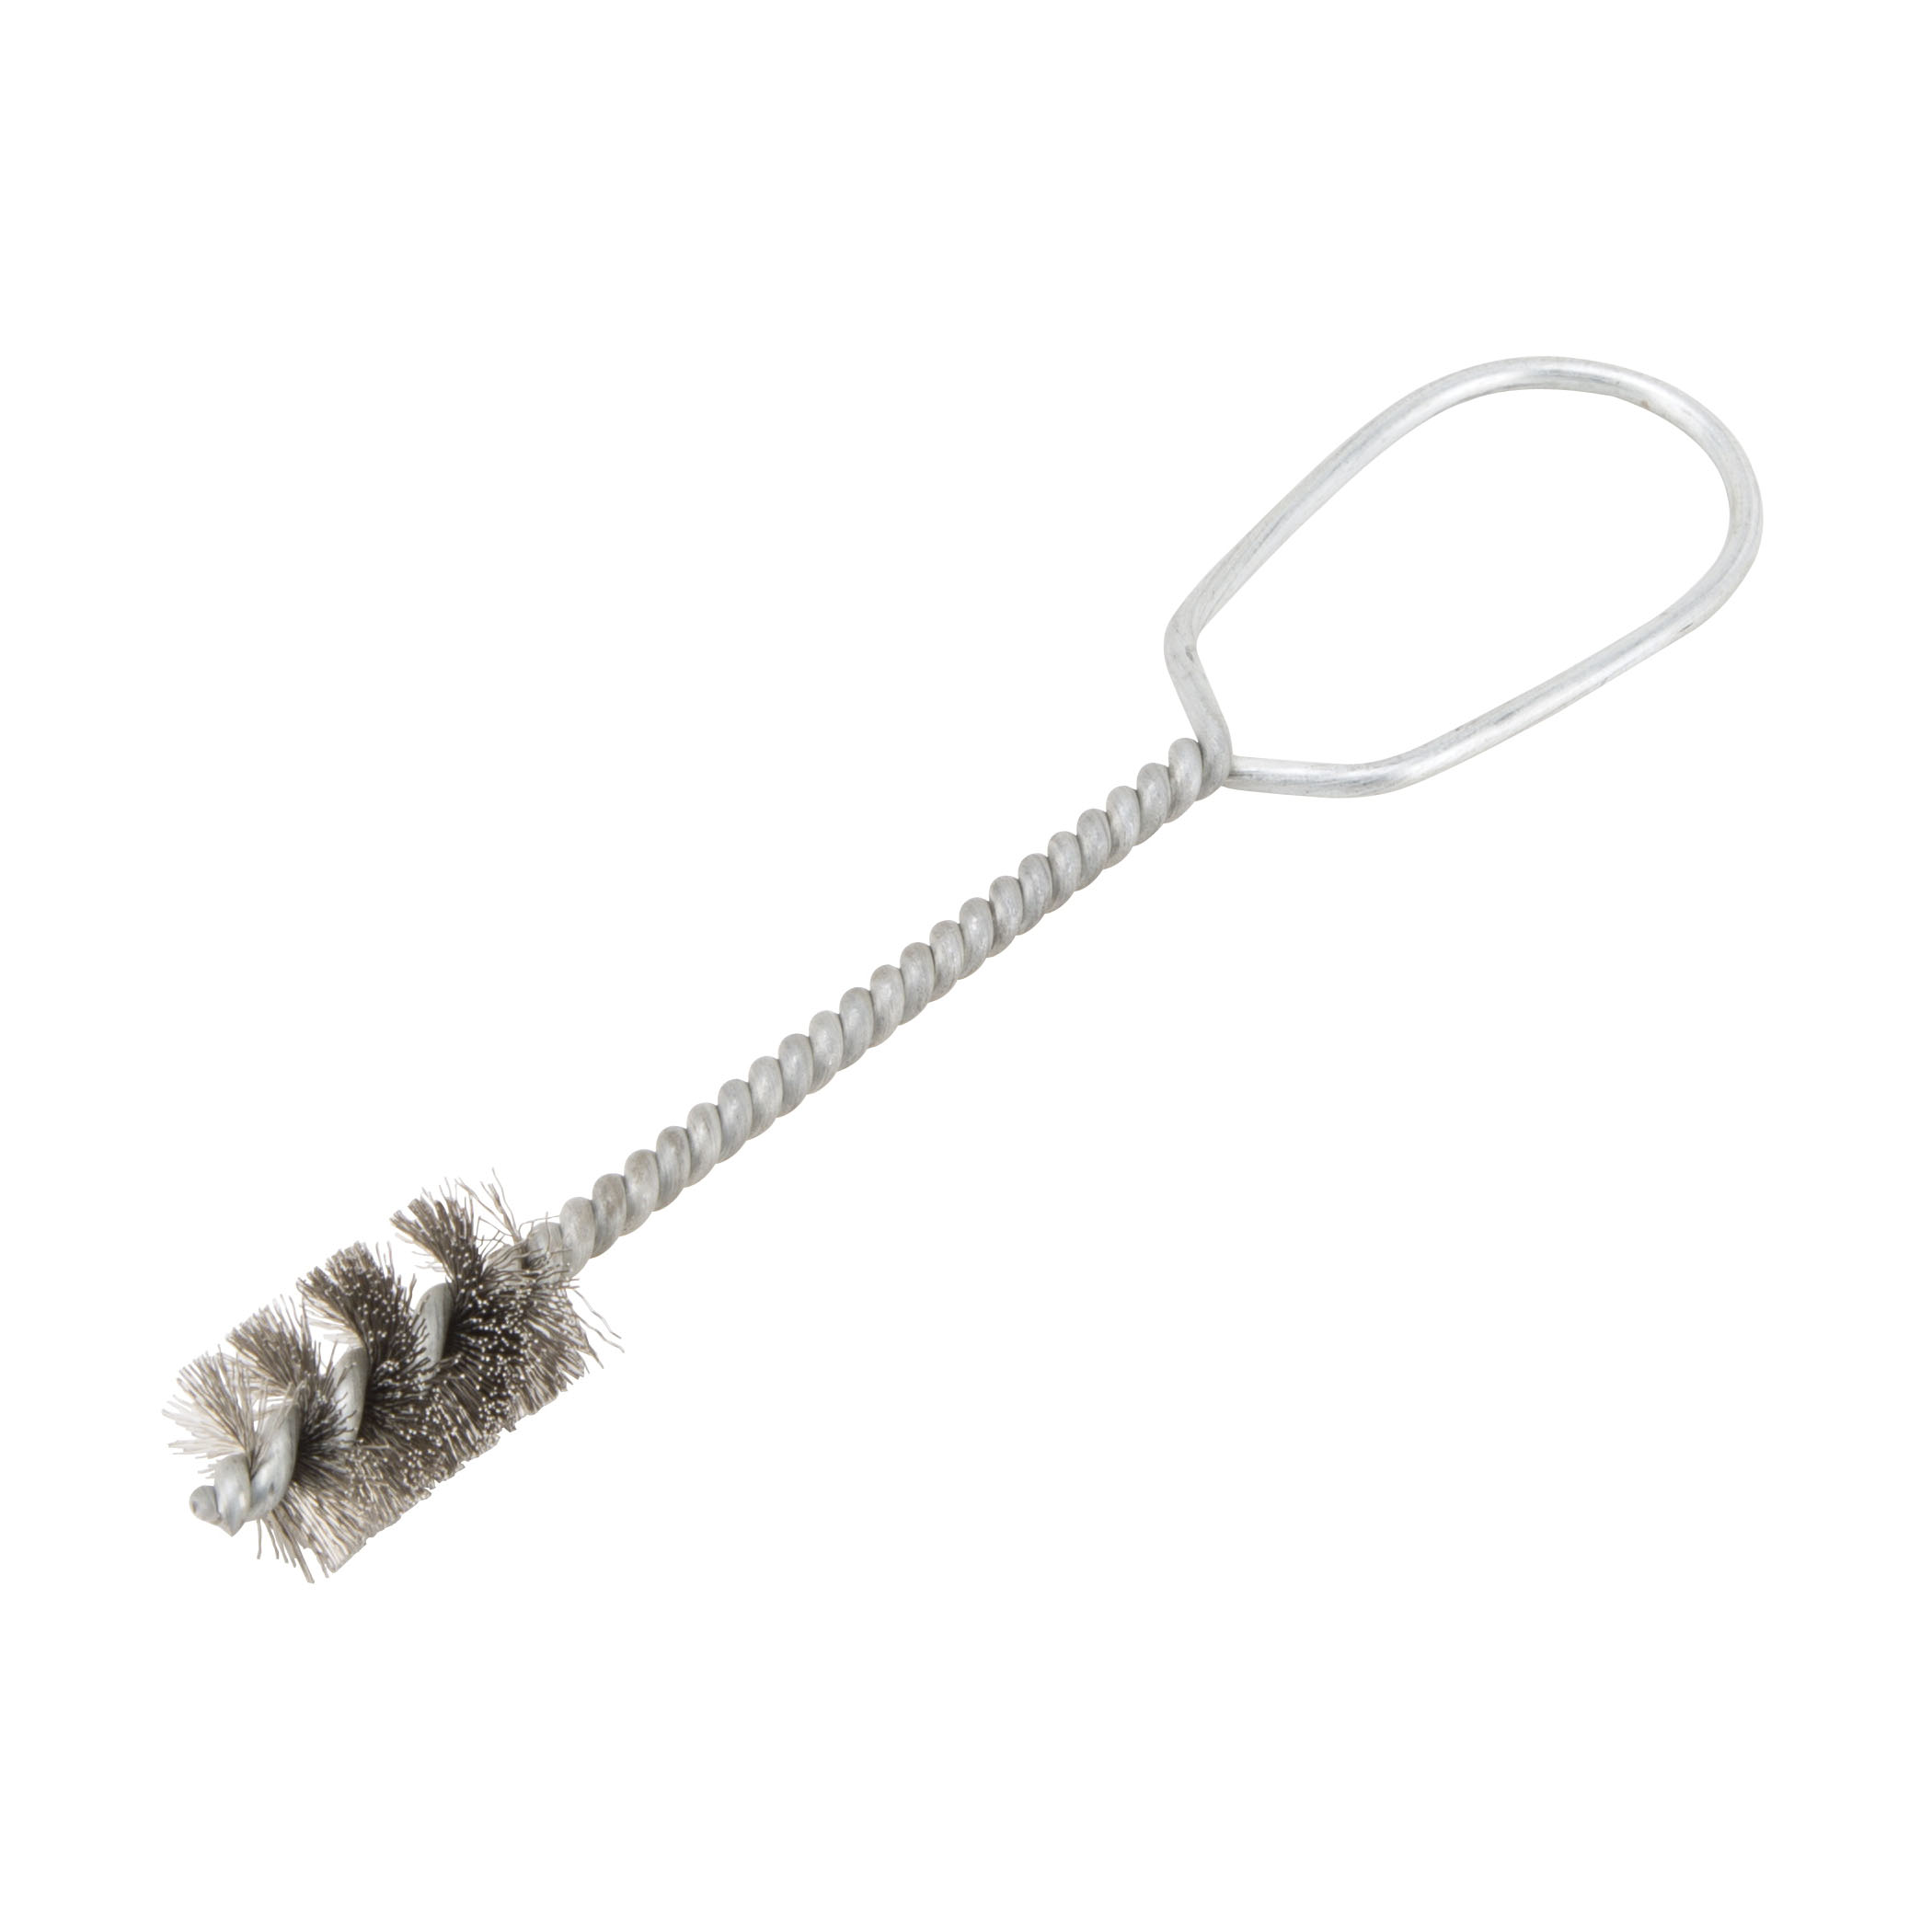 PMB-508-3L Fitting Brush, 6-1/4 in OAL, Stainless Steel Bristle, 1 in L Brush